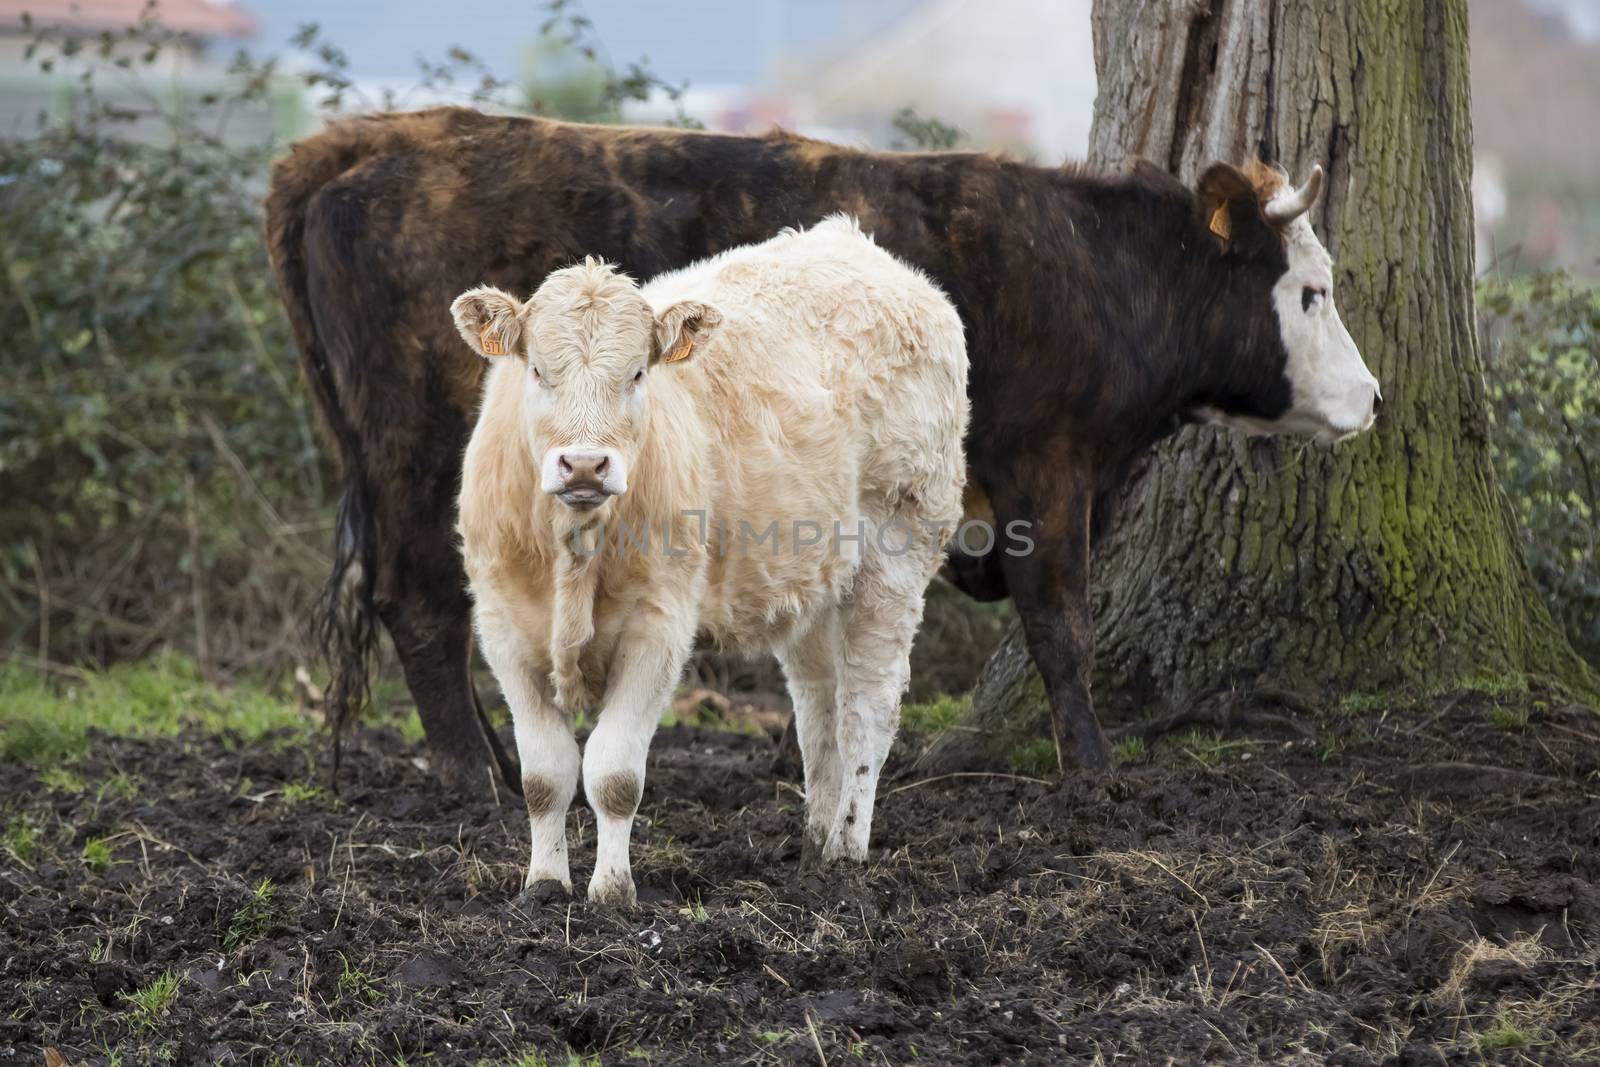 Cow grazing on dirty pasture agriculture crisis